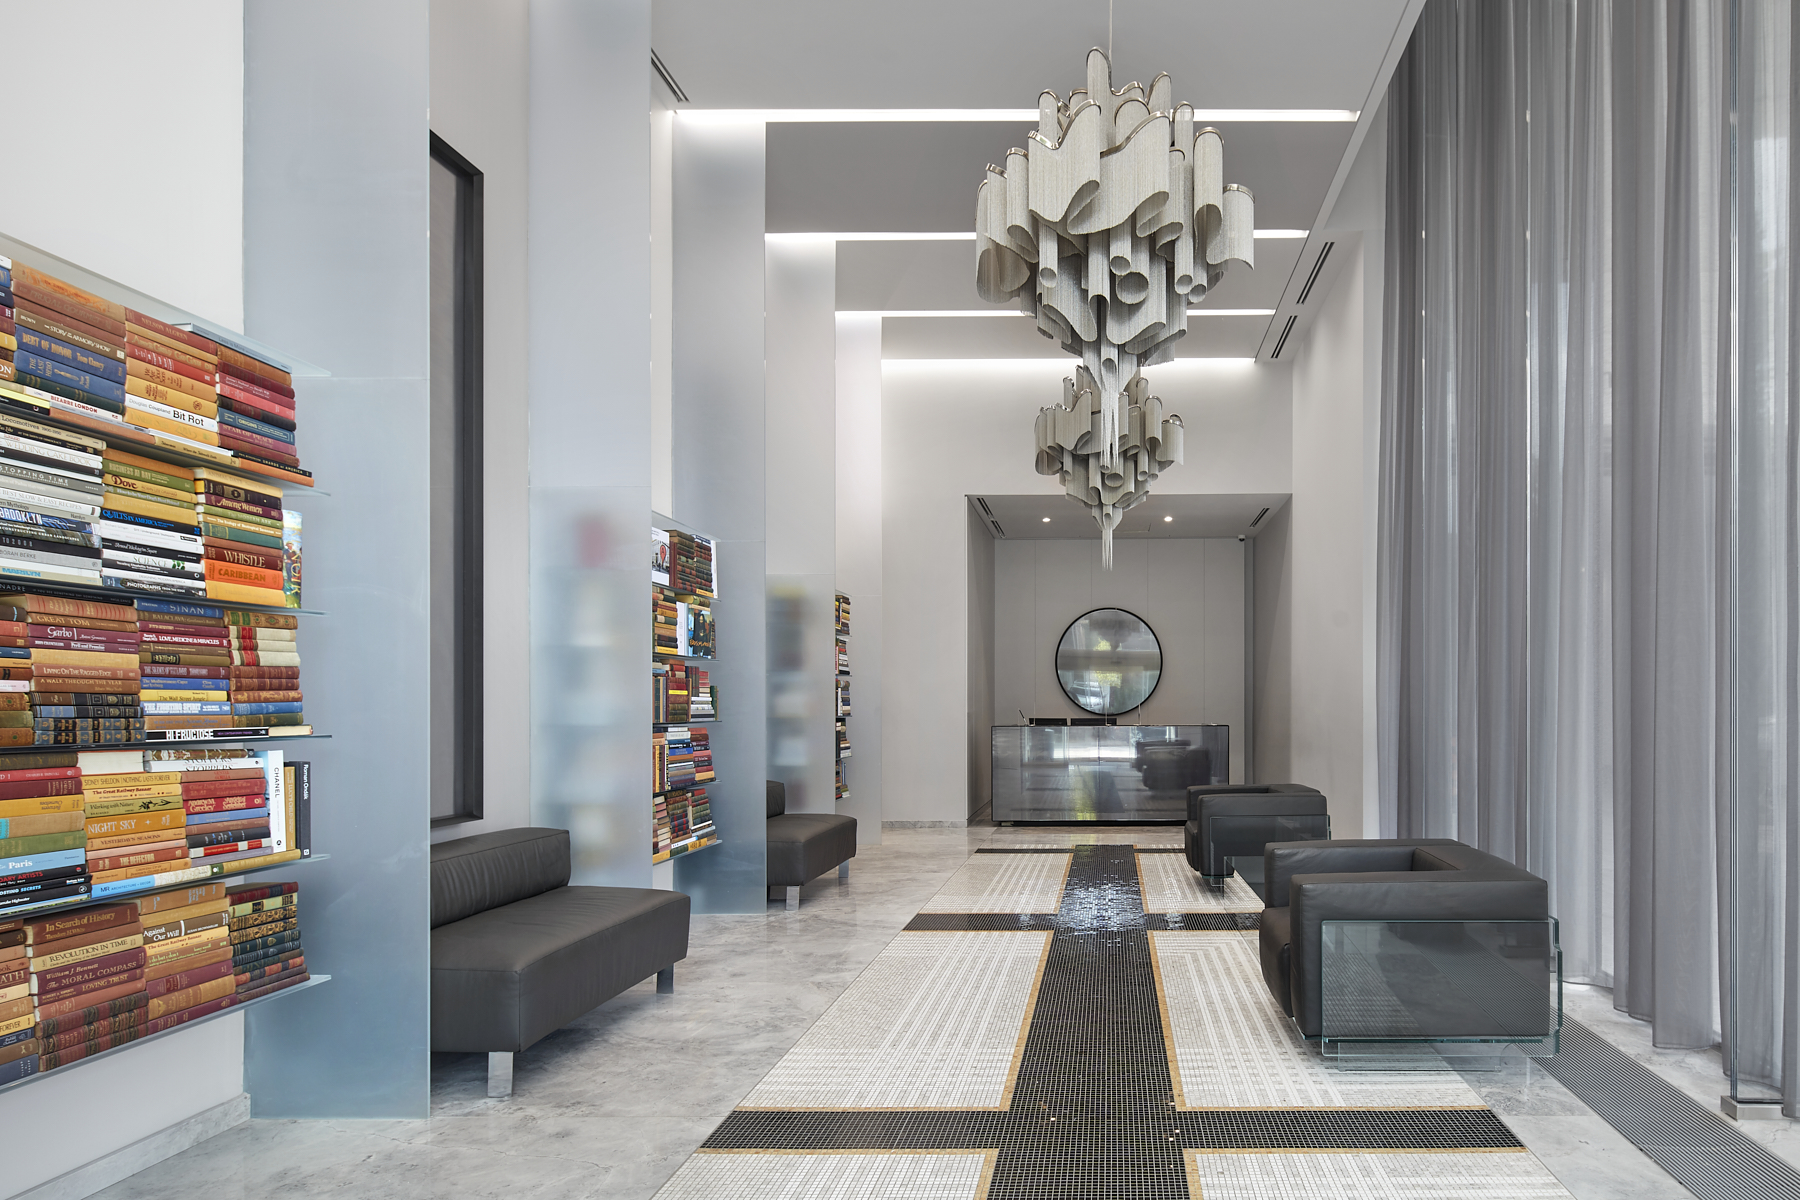 Chic condo lobby with stylish chandelier and bookshelves.